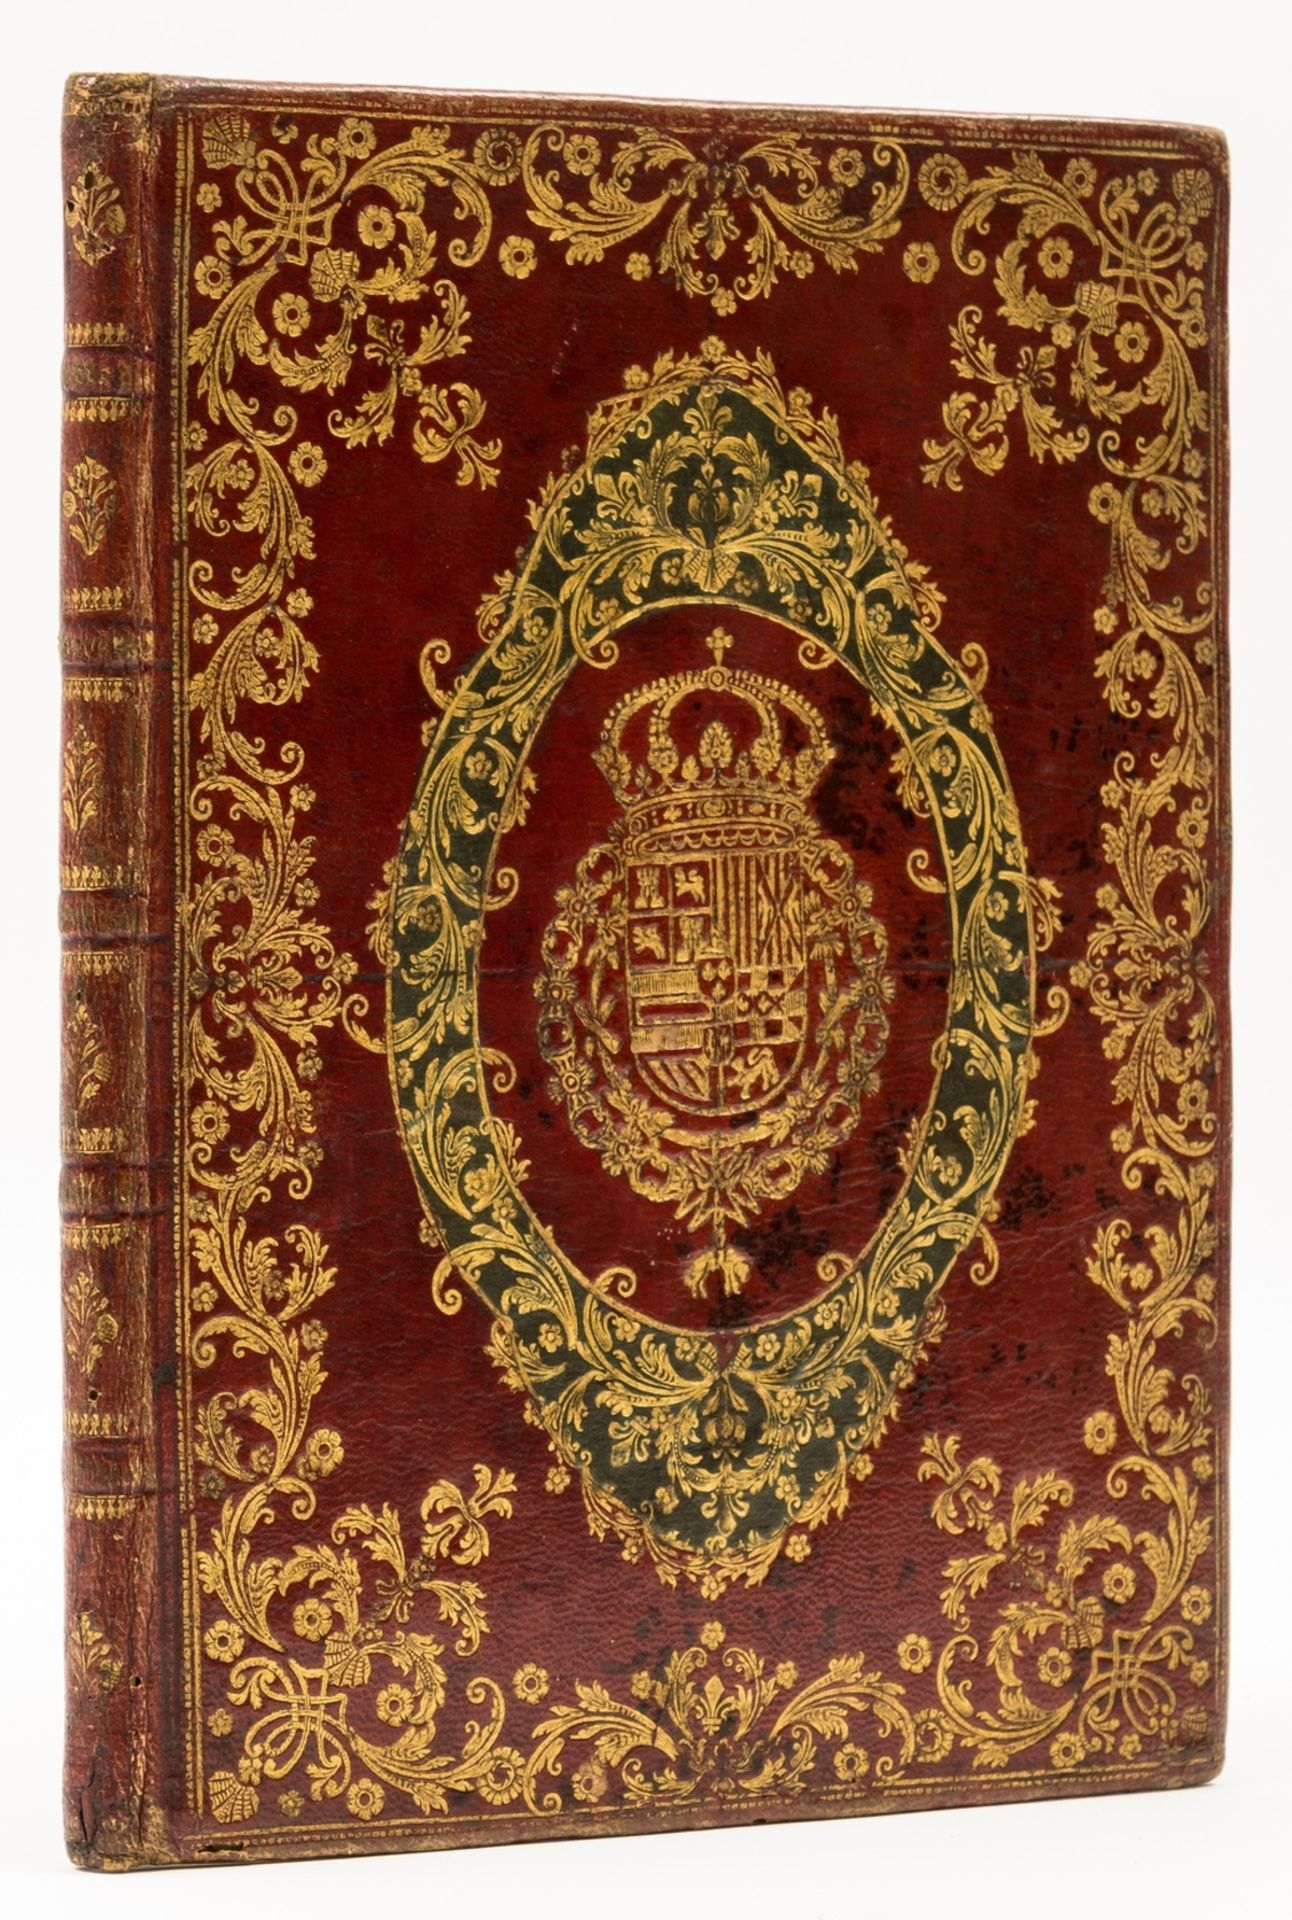 Spanish binding.- 18th century red morocco binding bearing the royal arms of Spain, [18th century]